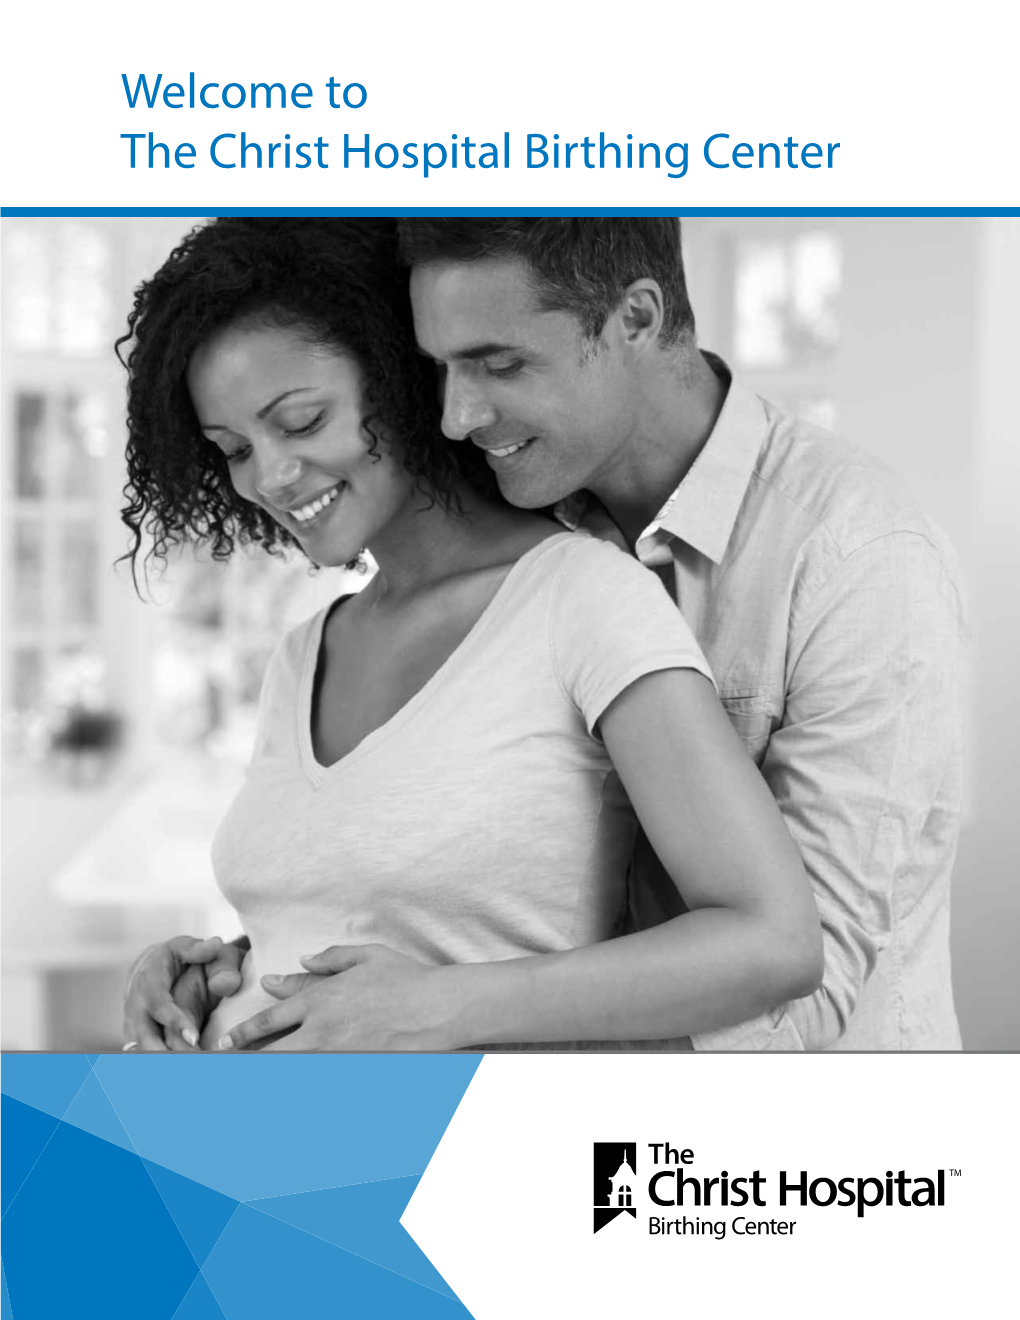 Welcome to the Christ Hospital Birthing Center Welcome to the Christ Hospital Birthing Center